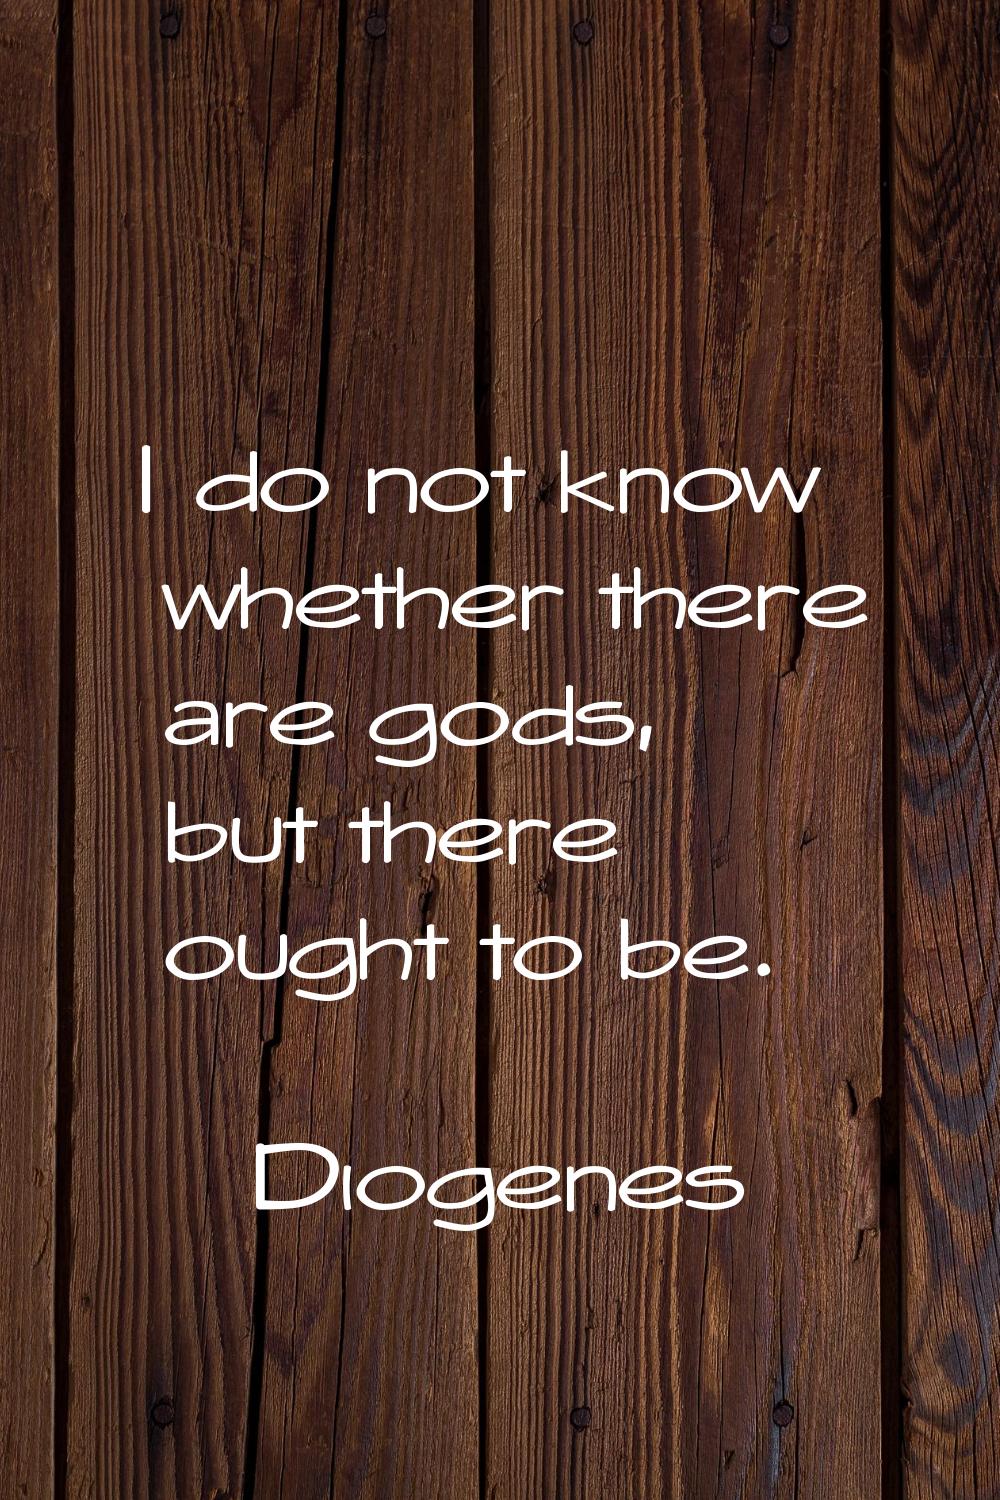 I do not know whether there are gods, but there ought to be.